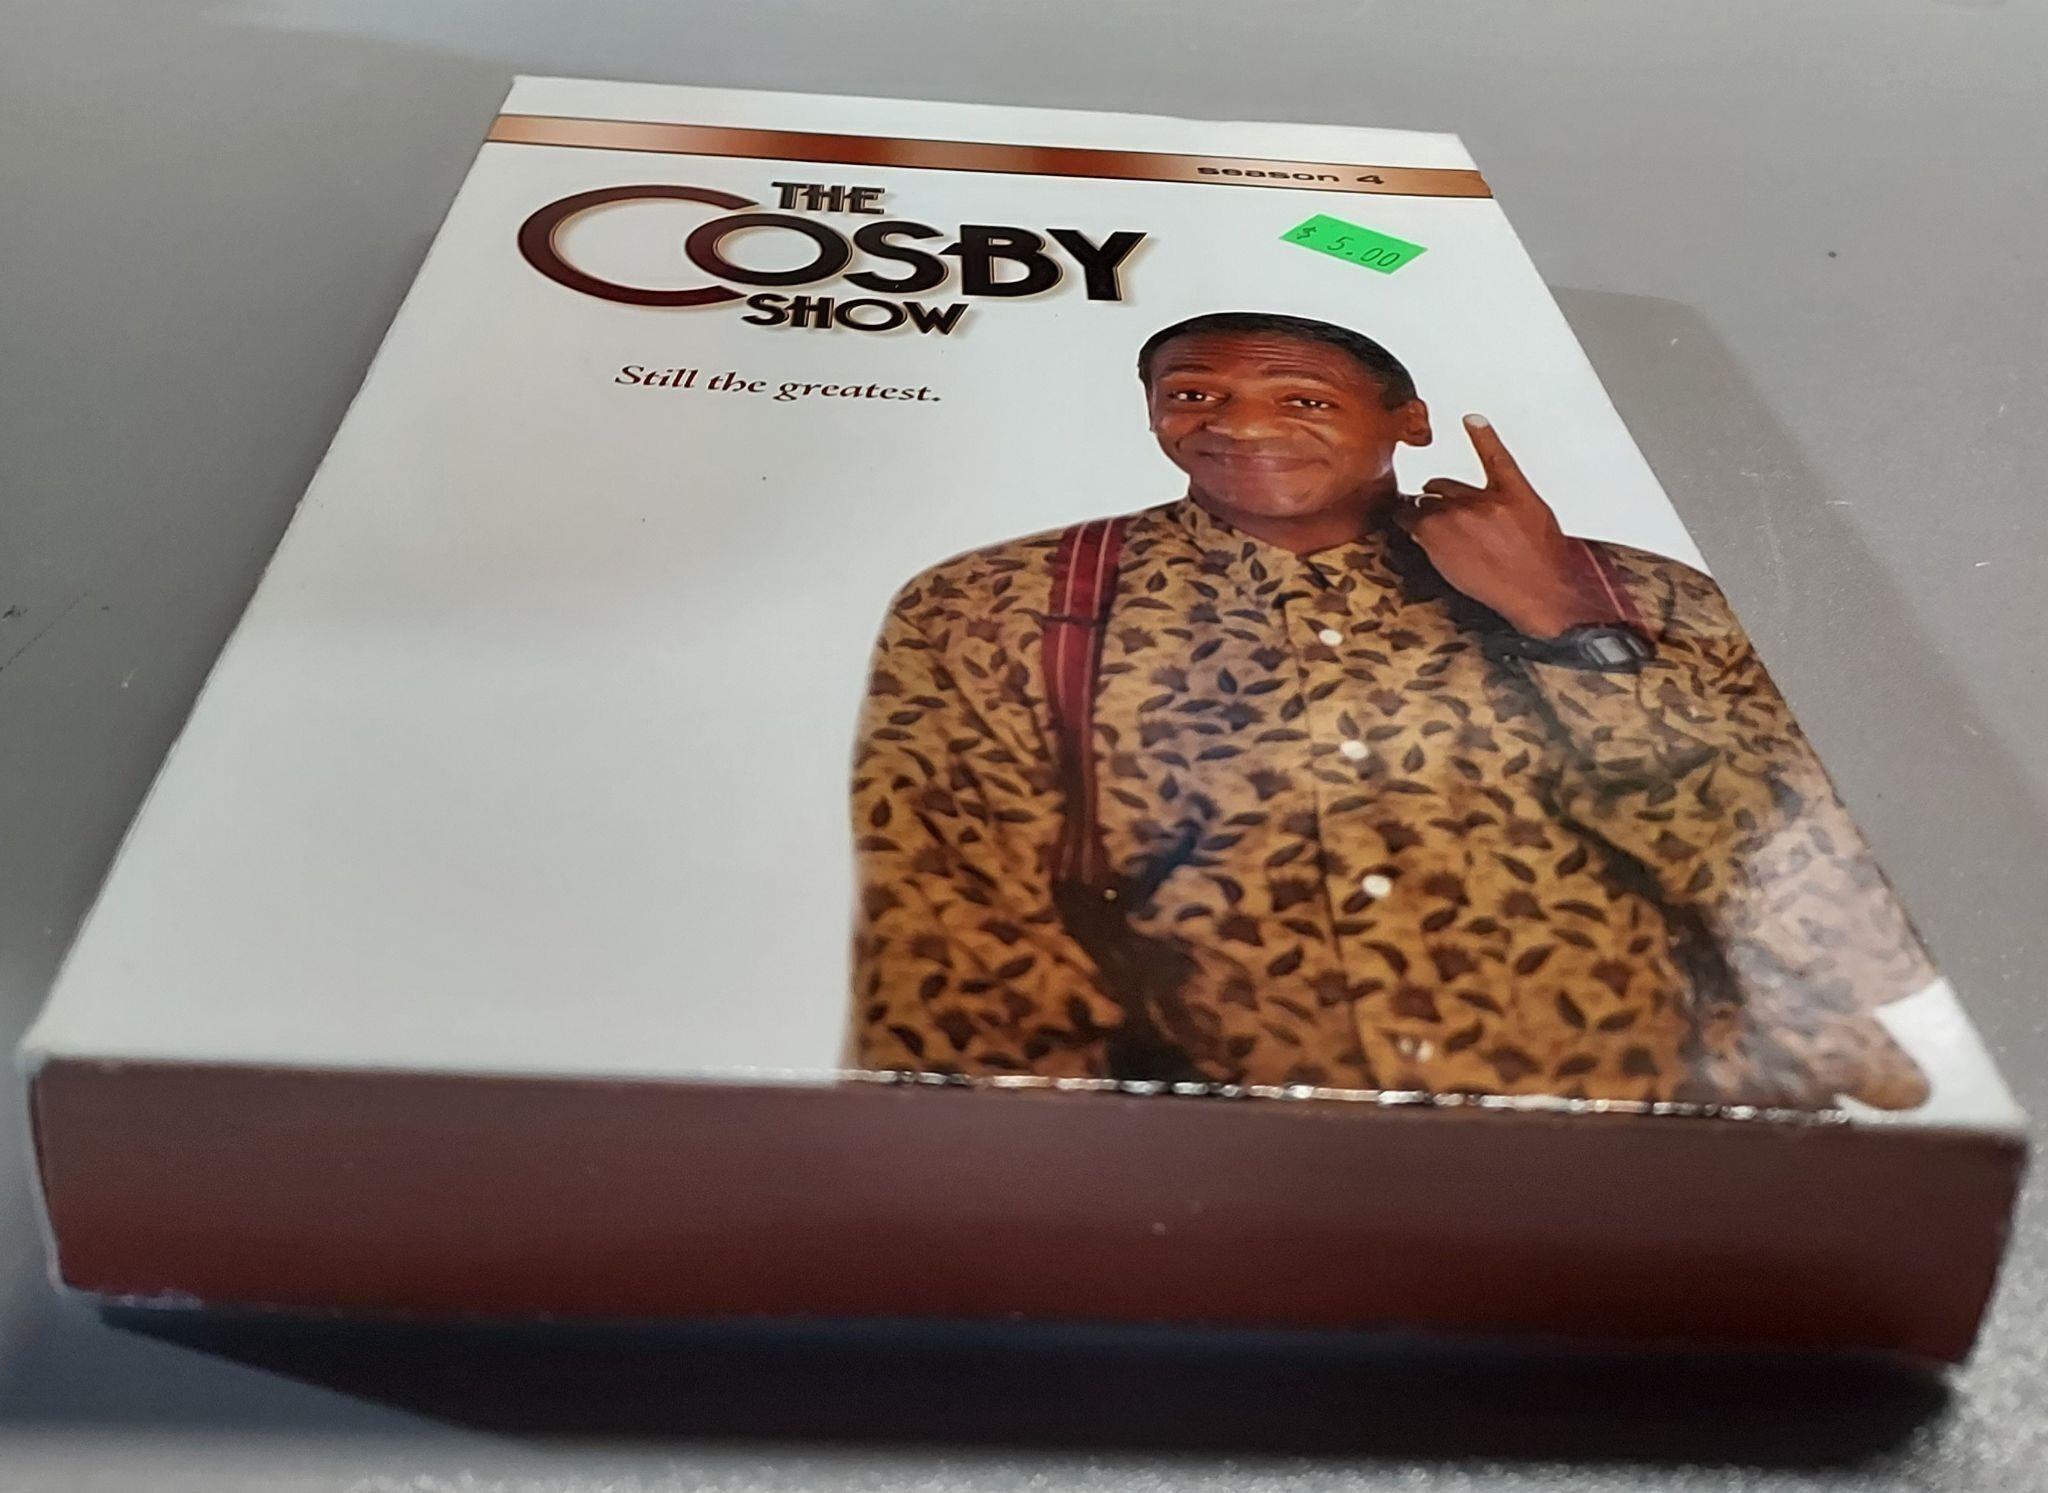 The Cosby Show complete Season 4 DVD